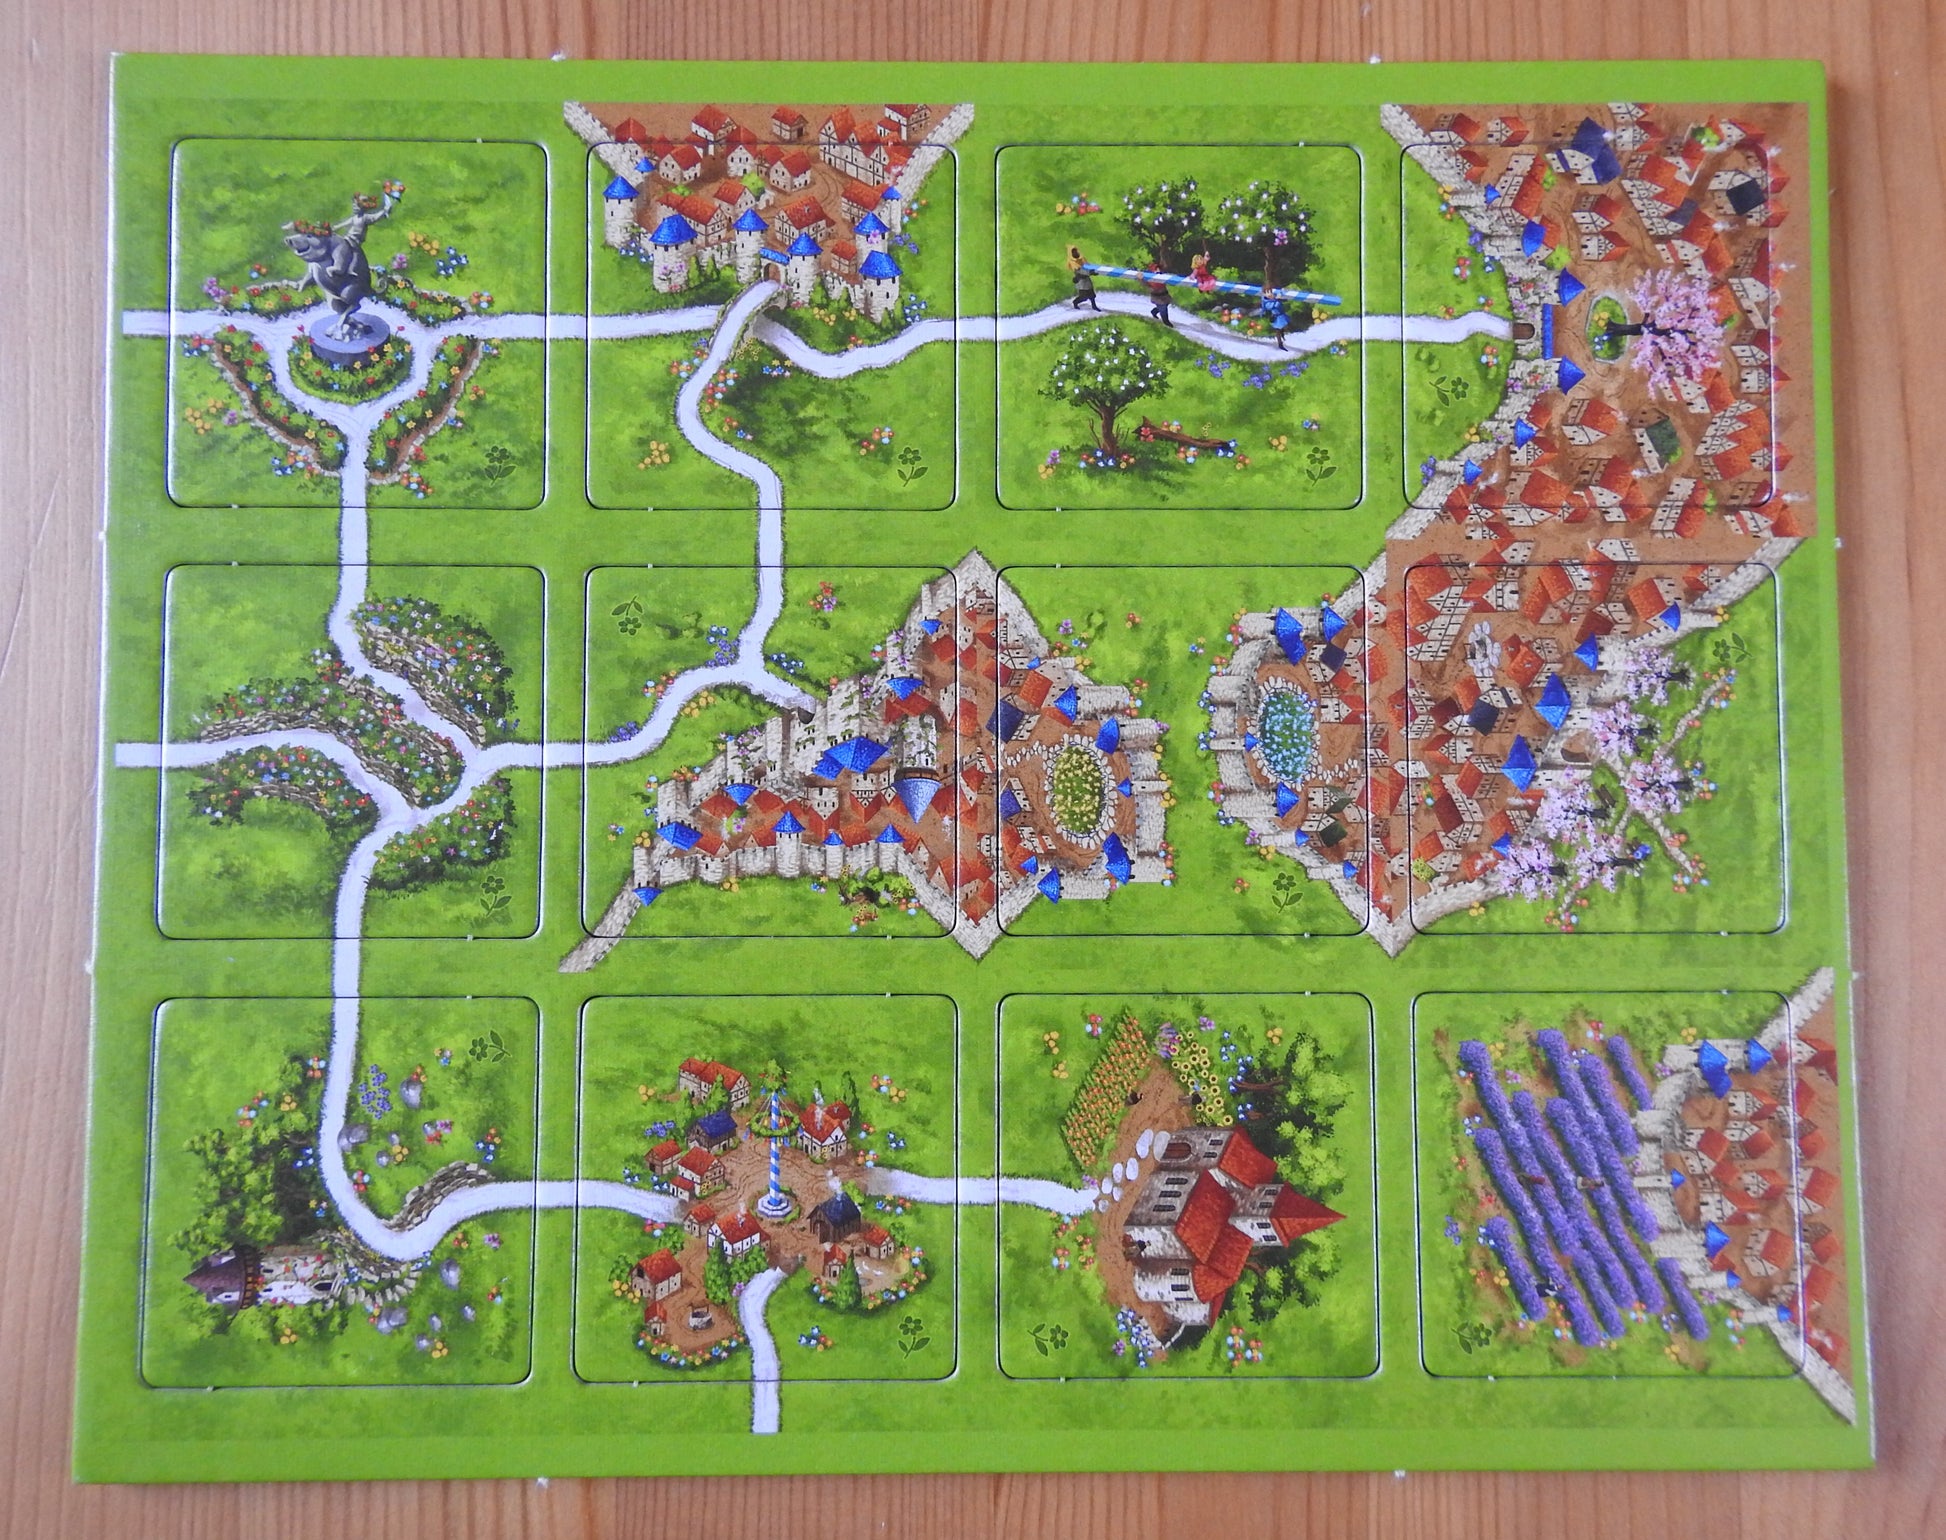 View of all 12 landscape tiles included in this Spring mini expansion for Carcassonne.